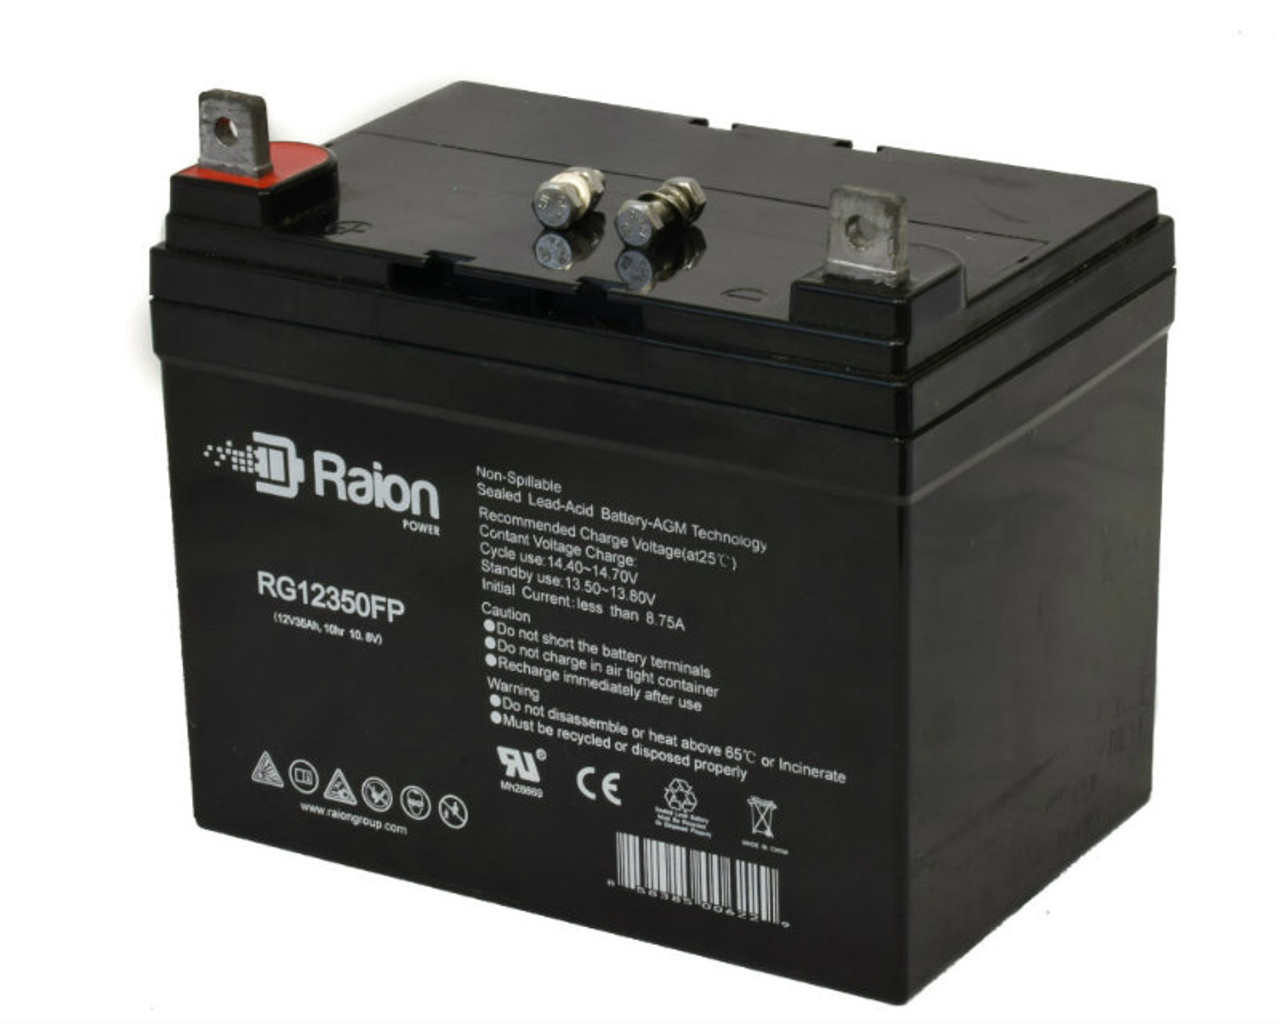 Raion Power Replacement 12V 35Ah RG12350FP Battery for Ford Motor Co. RMT66